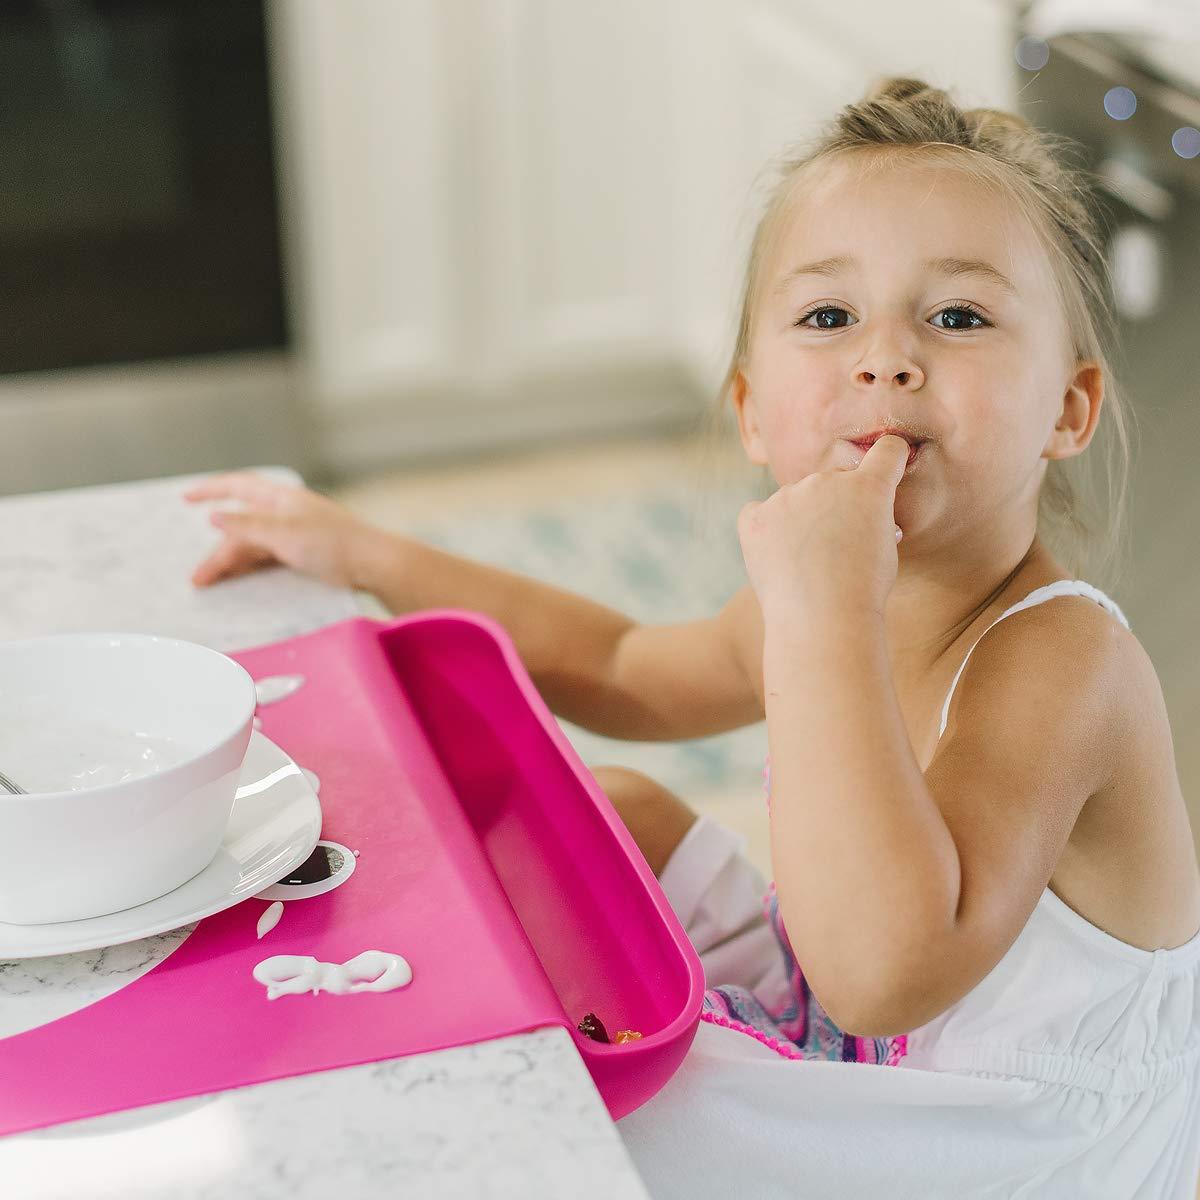 The Cibo Food Catching Baby Placemat with Suction - Wide Mouth Silicone  Placemat for Toddlers Kids and Babies - See Video Demonstration Strawberry  Red